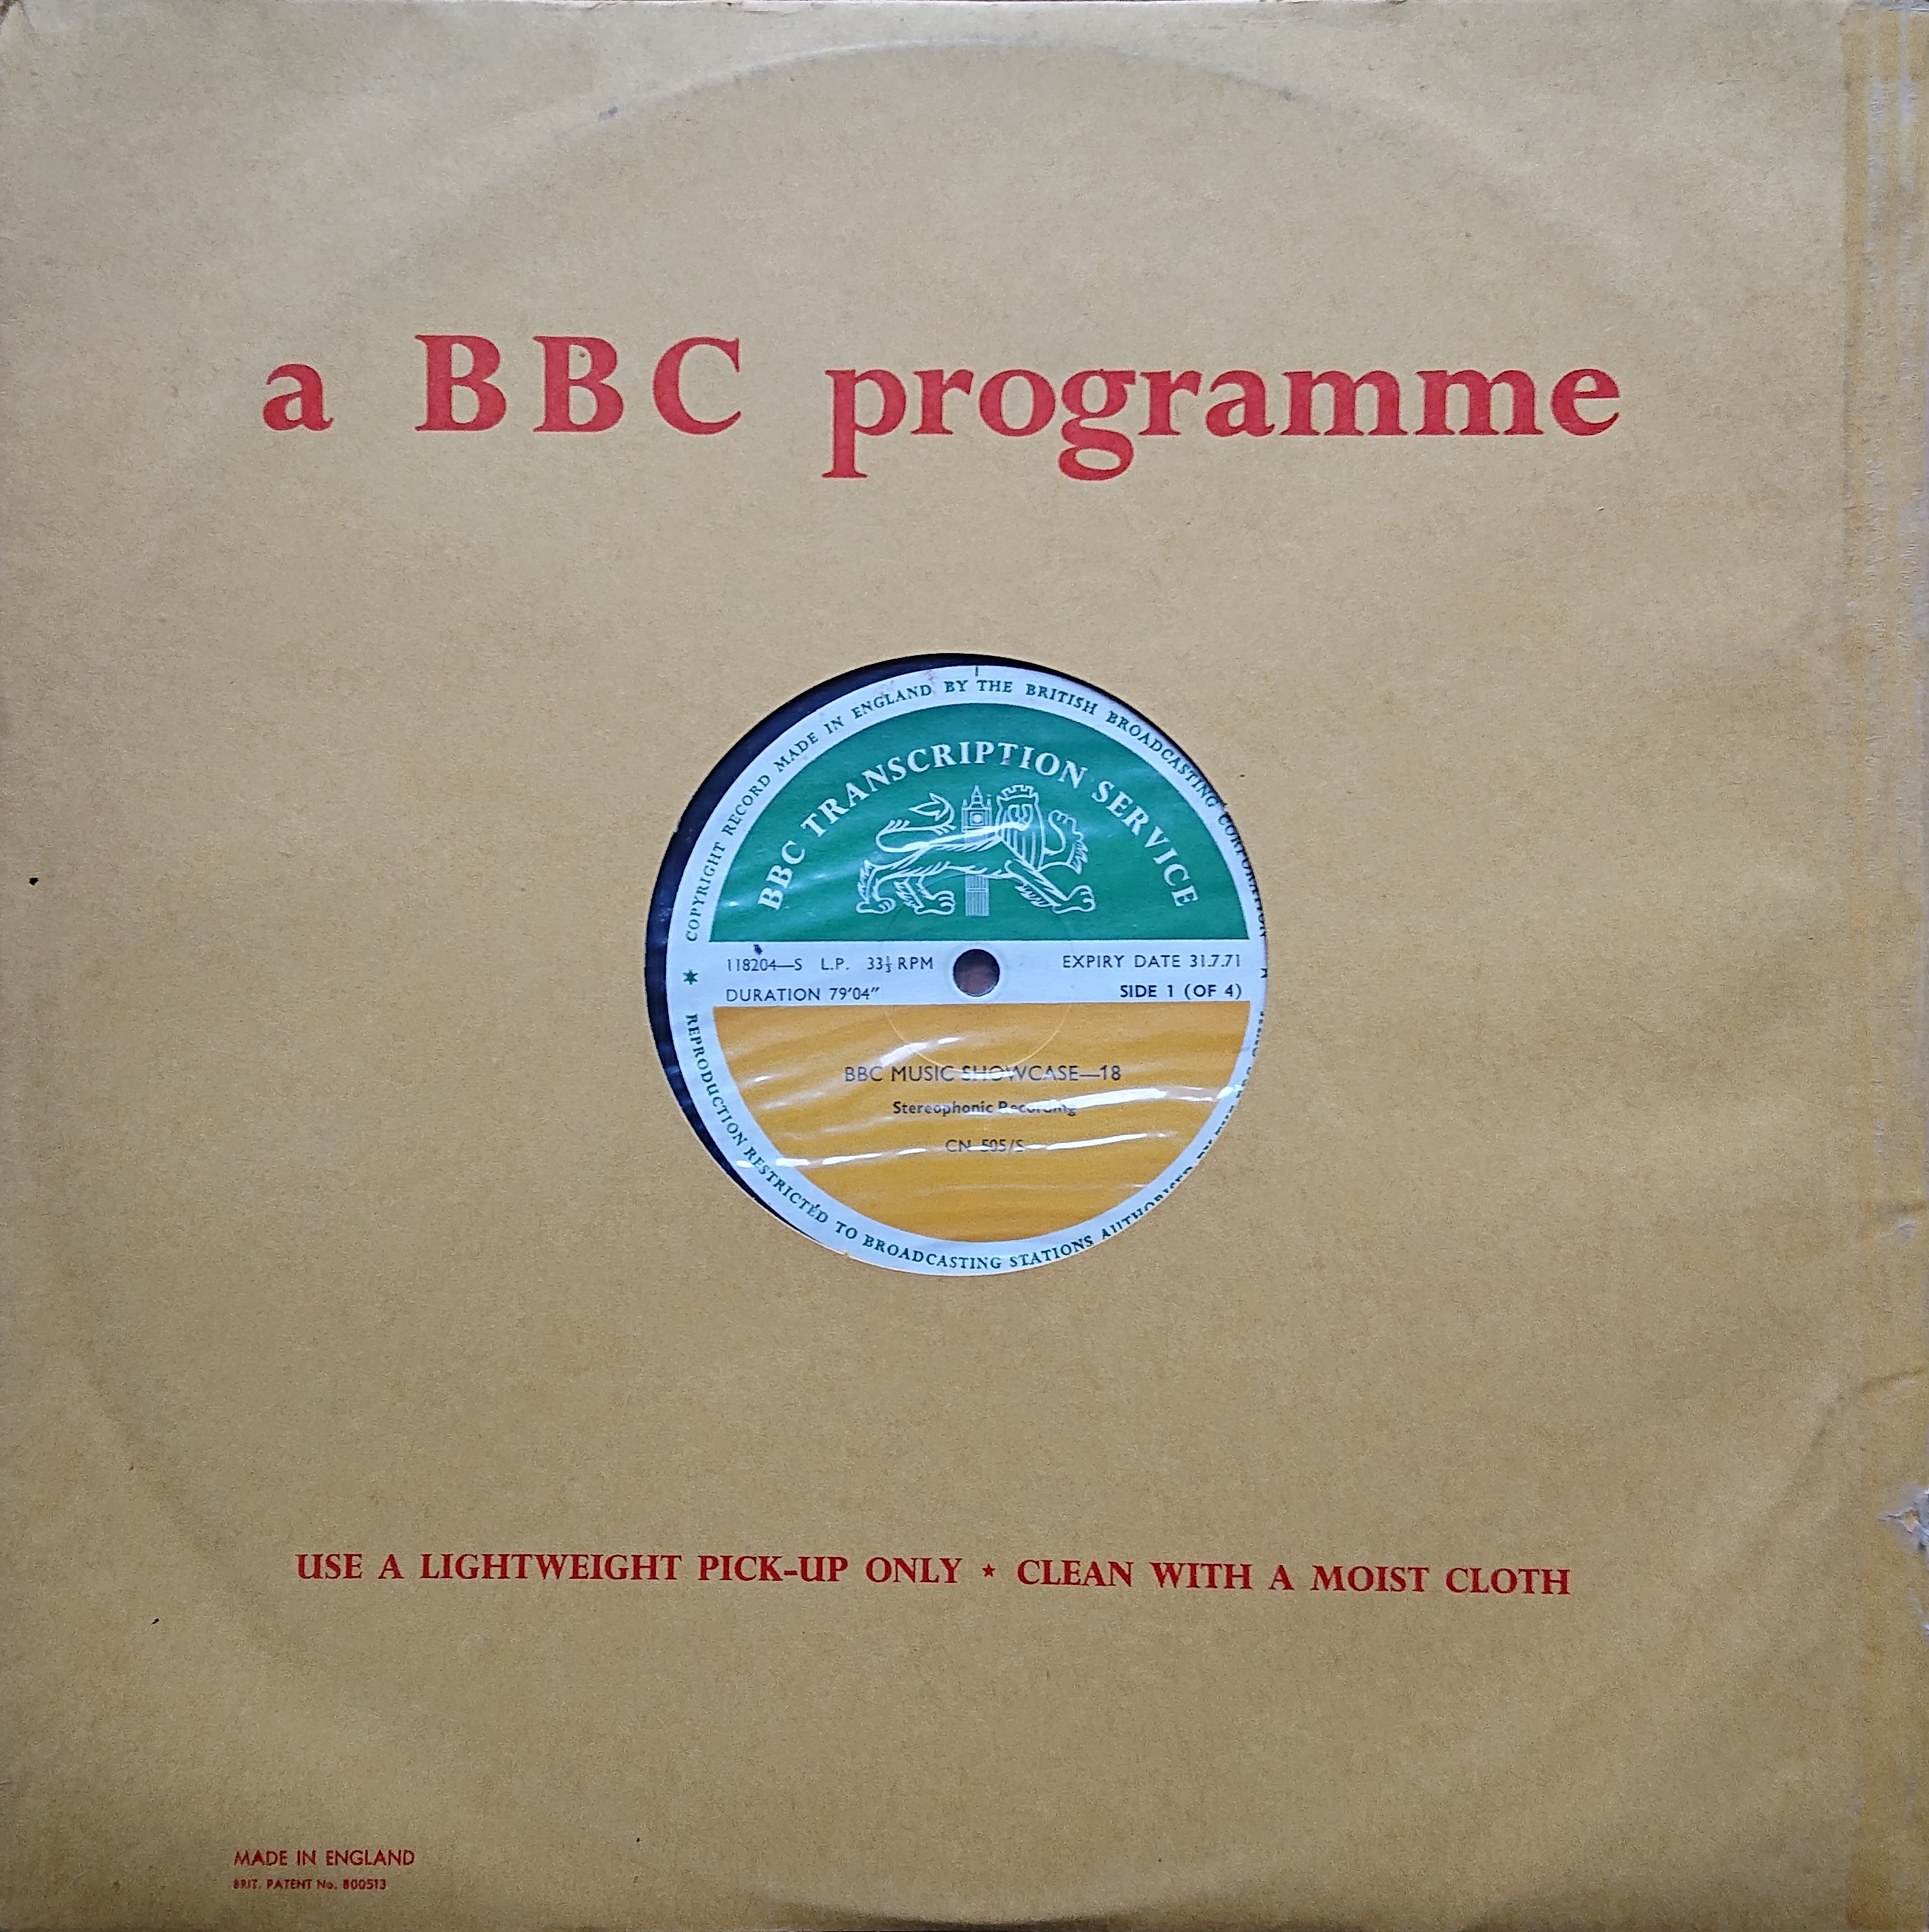 Picture of CN 505 S 35 BBC music showcase - 18 (Sides 1 & 3) by artist Various from the BBC records and Tapes library